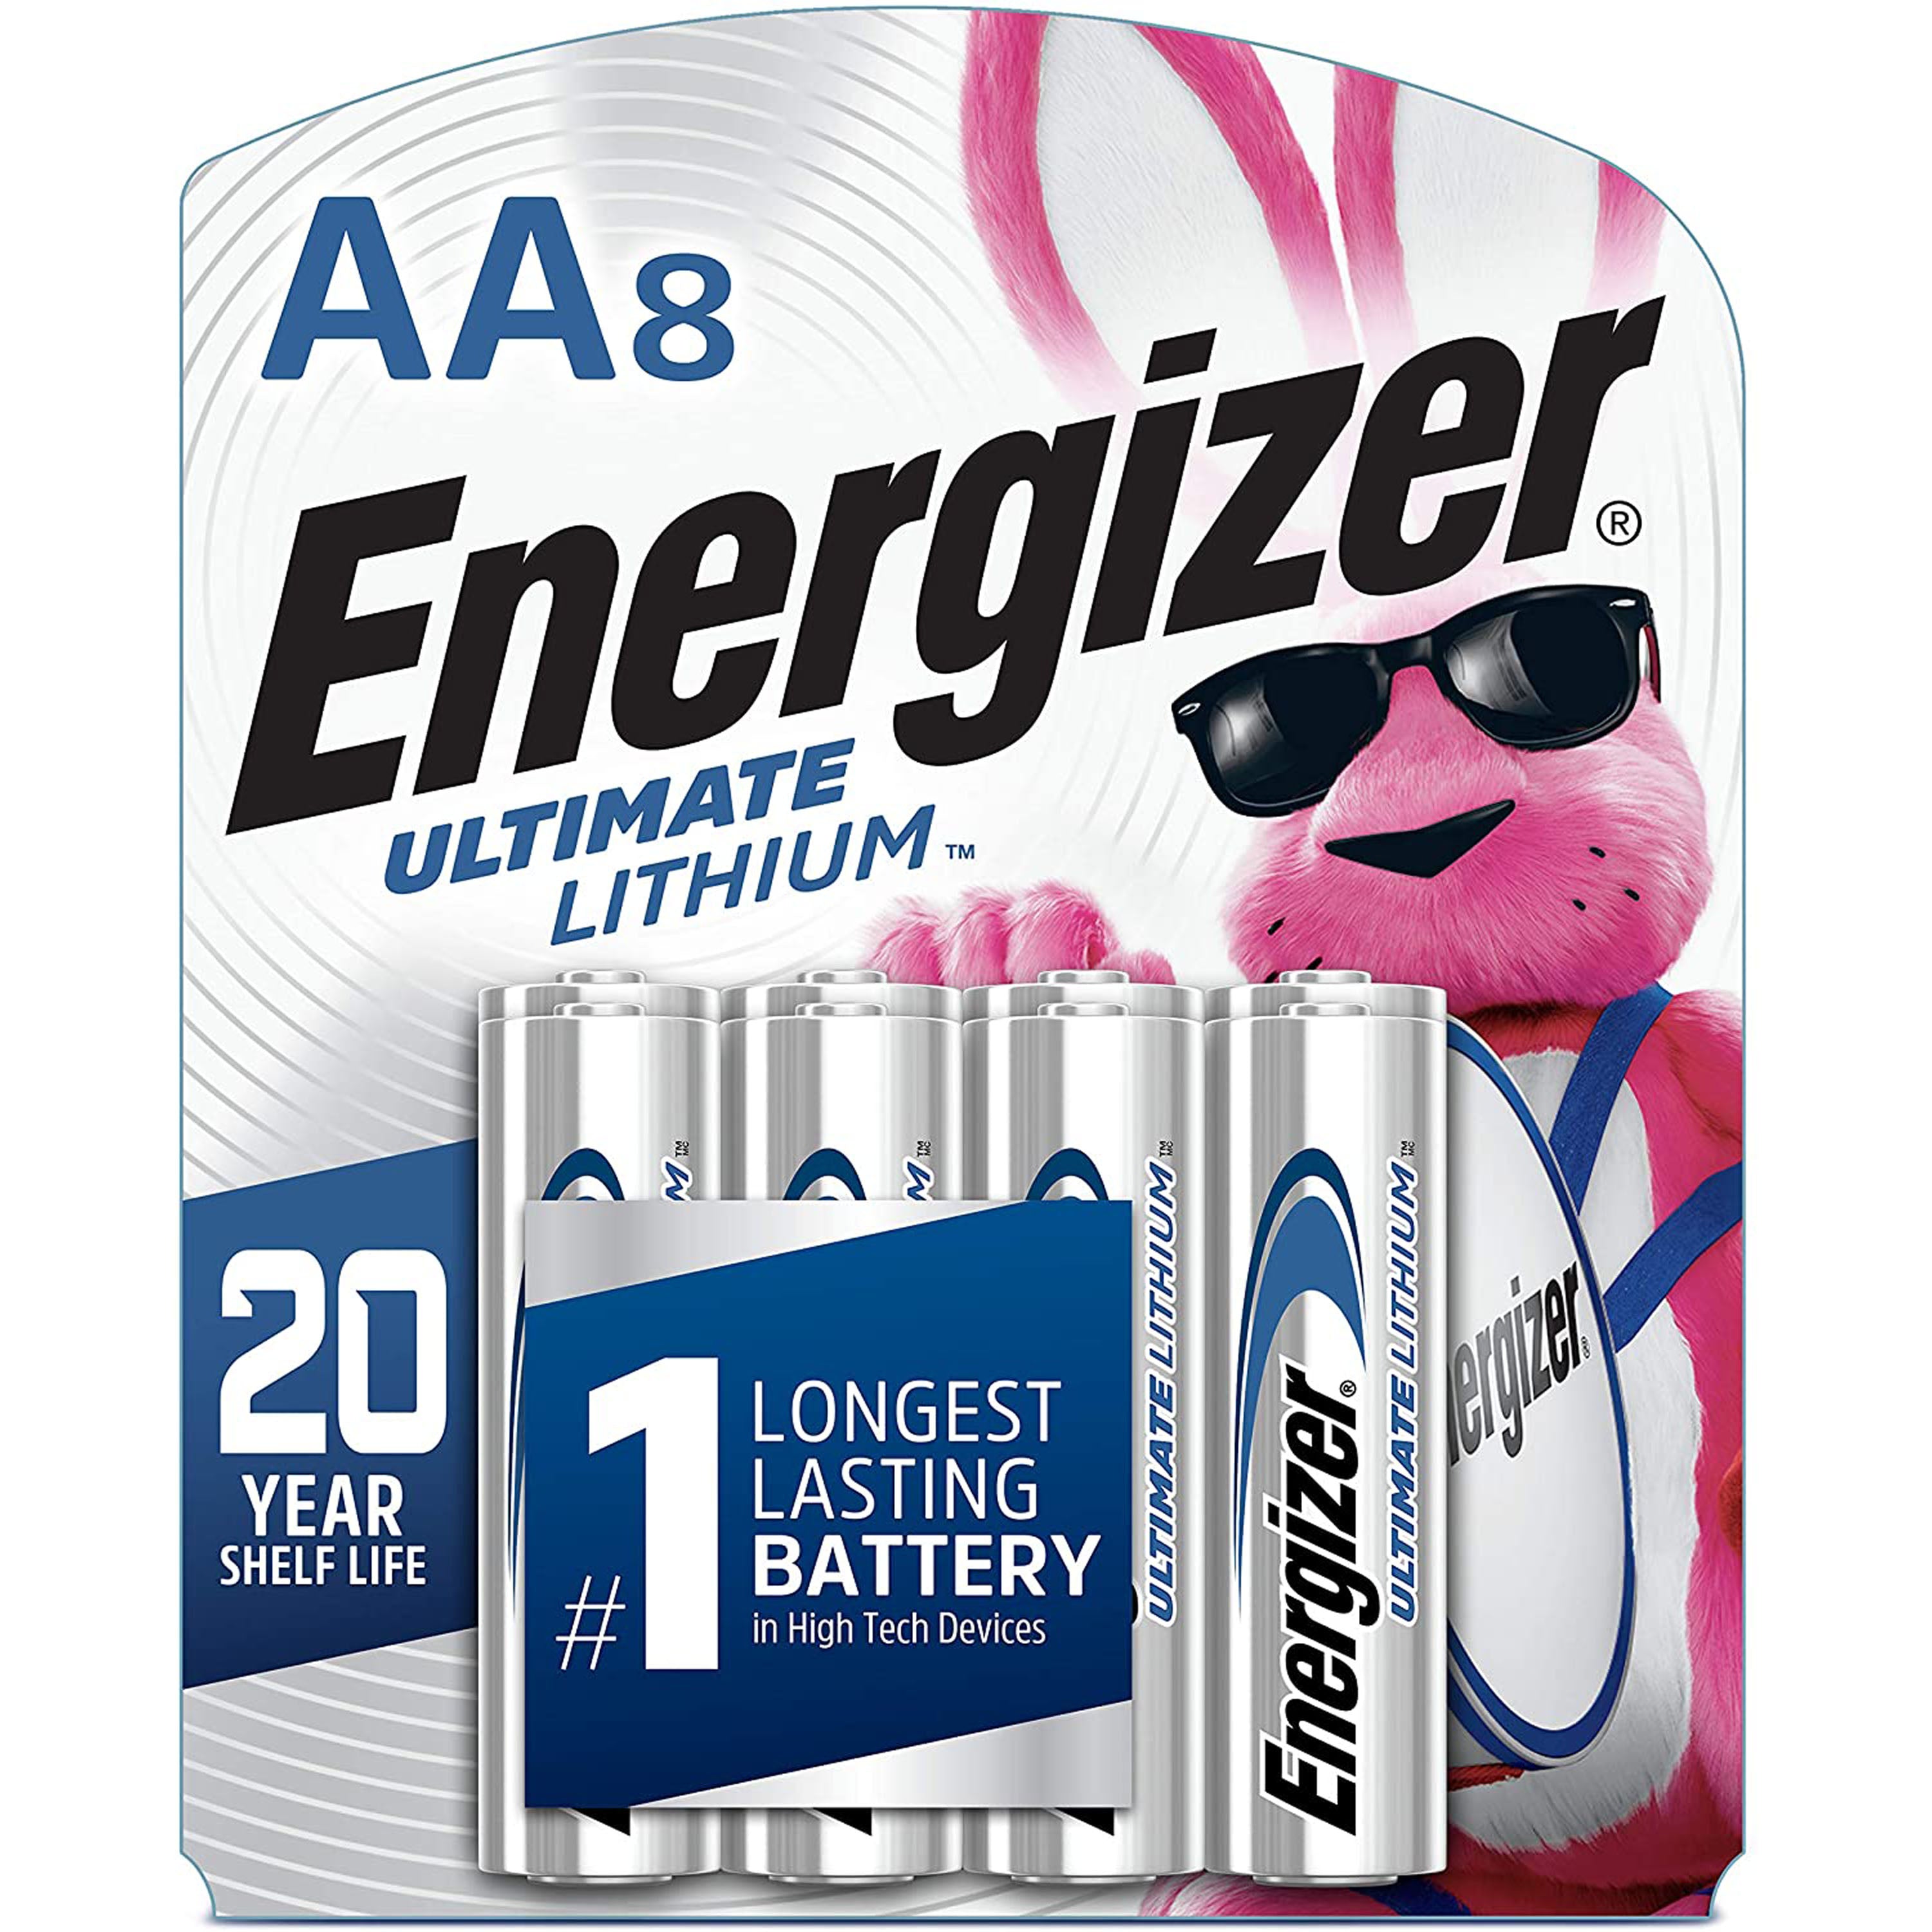 Energizer Ultimate Lithium AA (8 Pack)